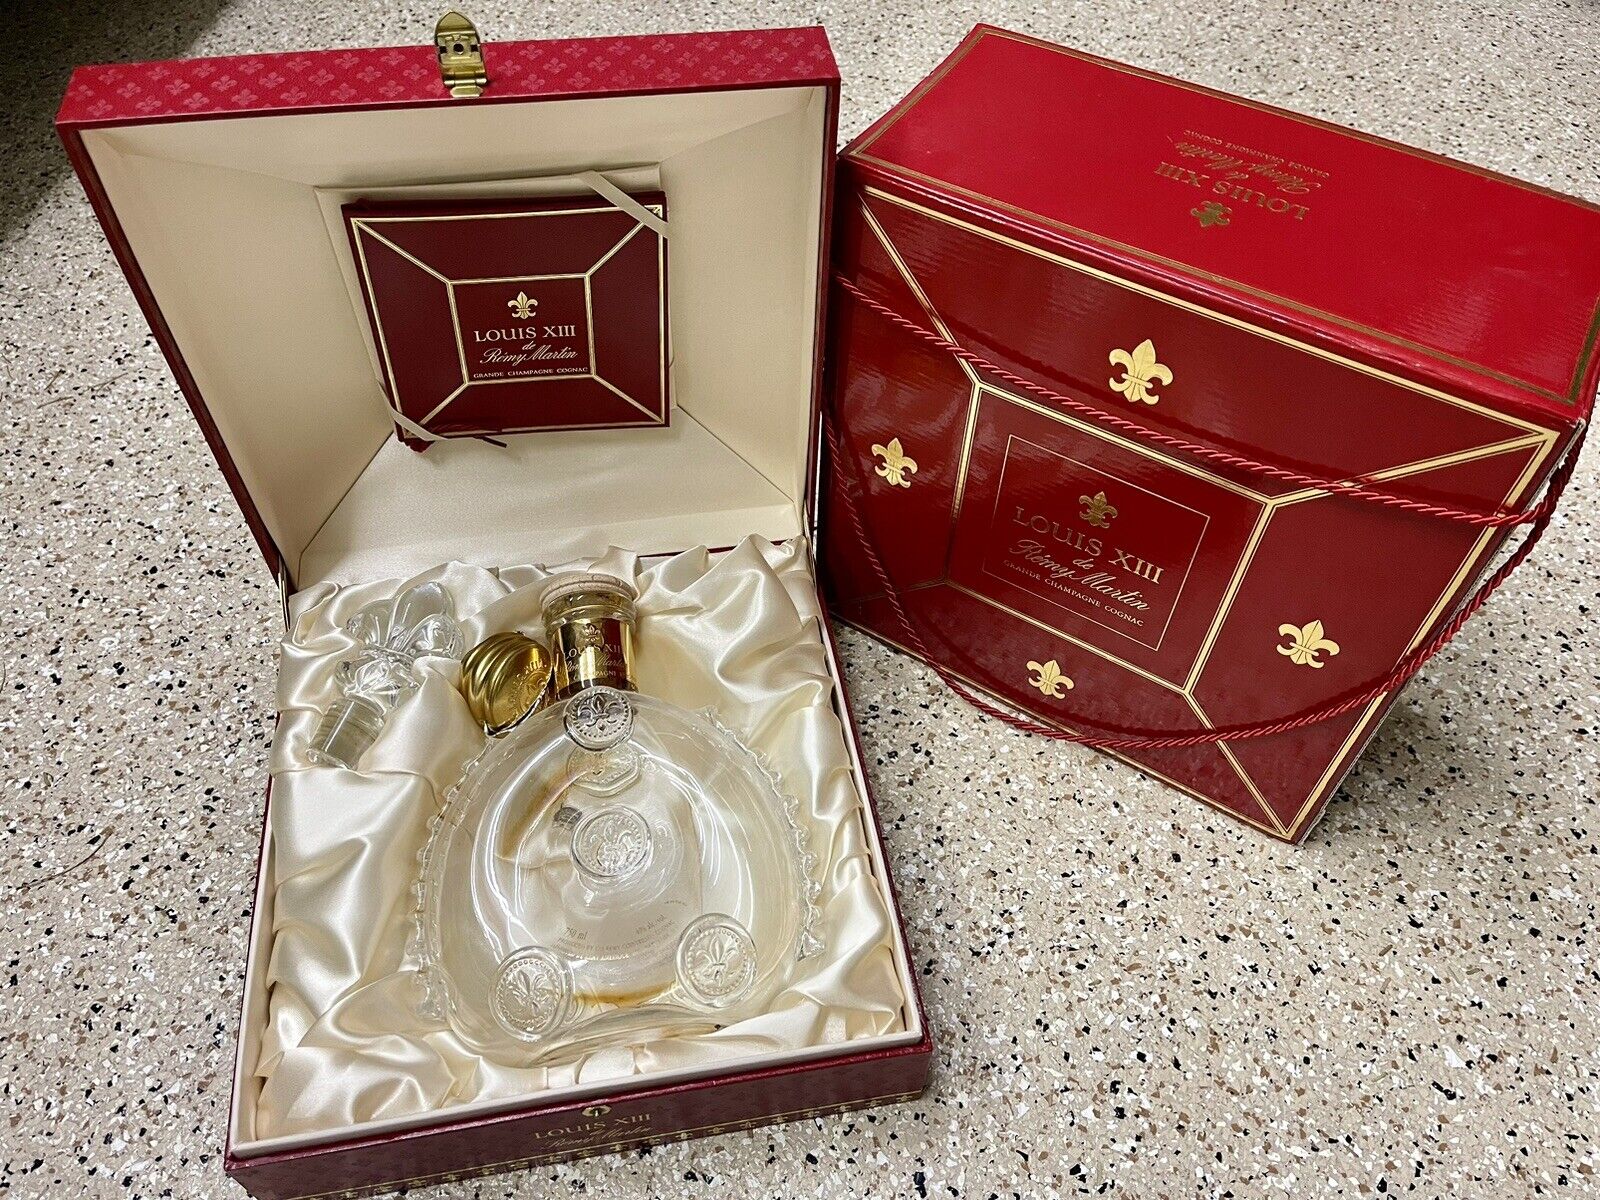 Louis XIII REMY MARTIN Grande Champagne Cognac EMPTY BACCARAT Crystal Bottle Box